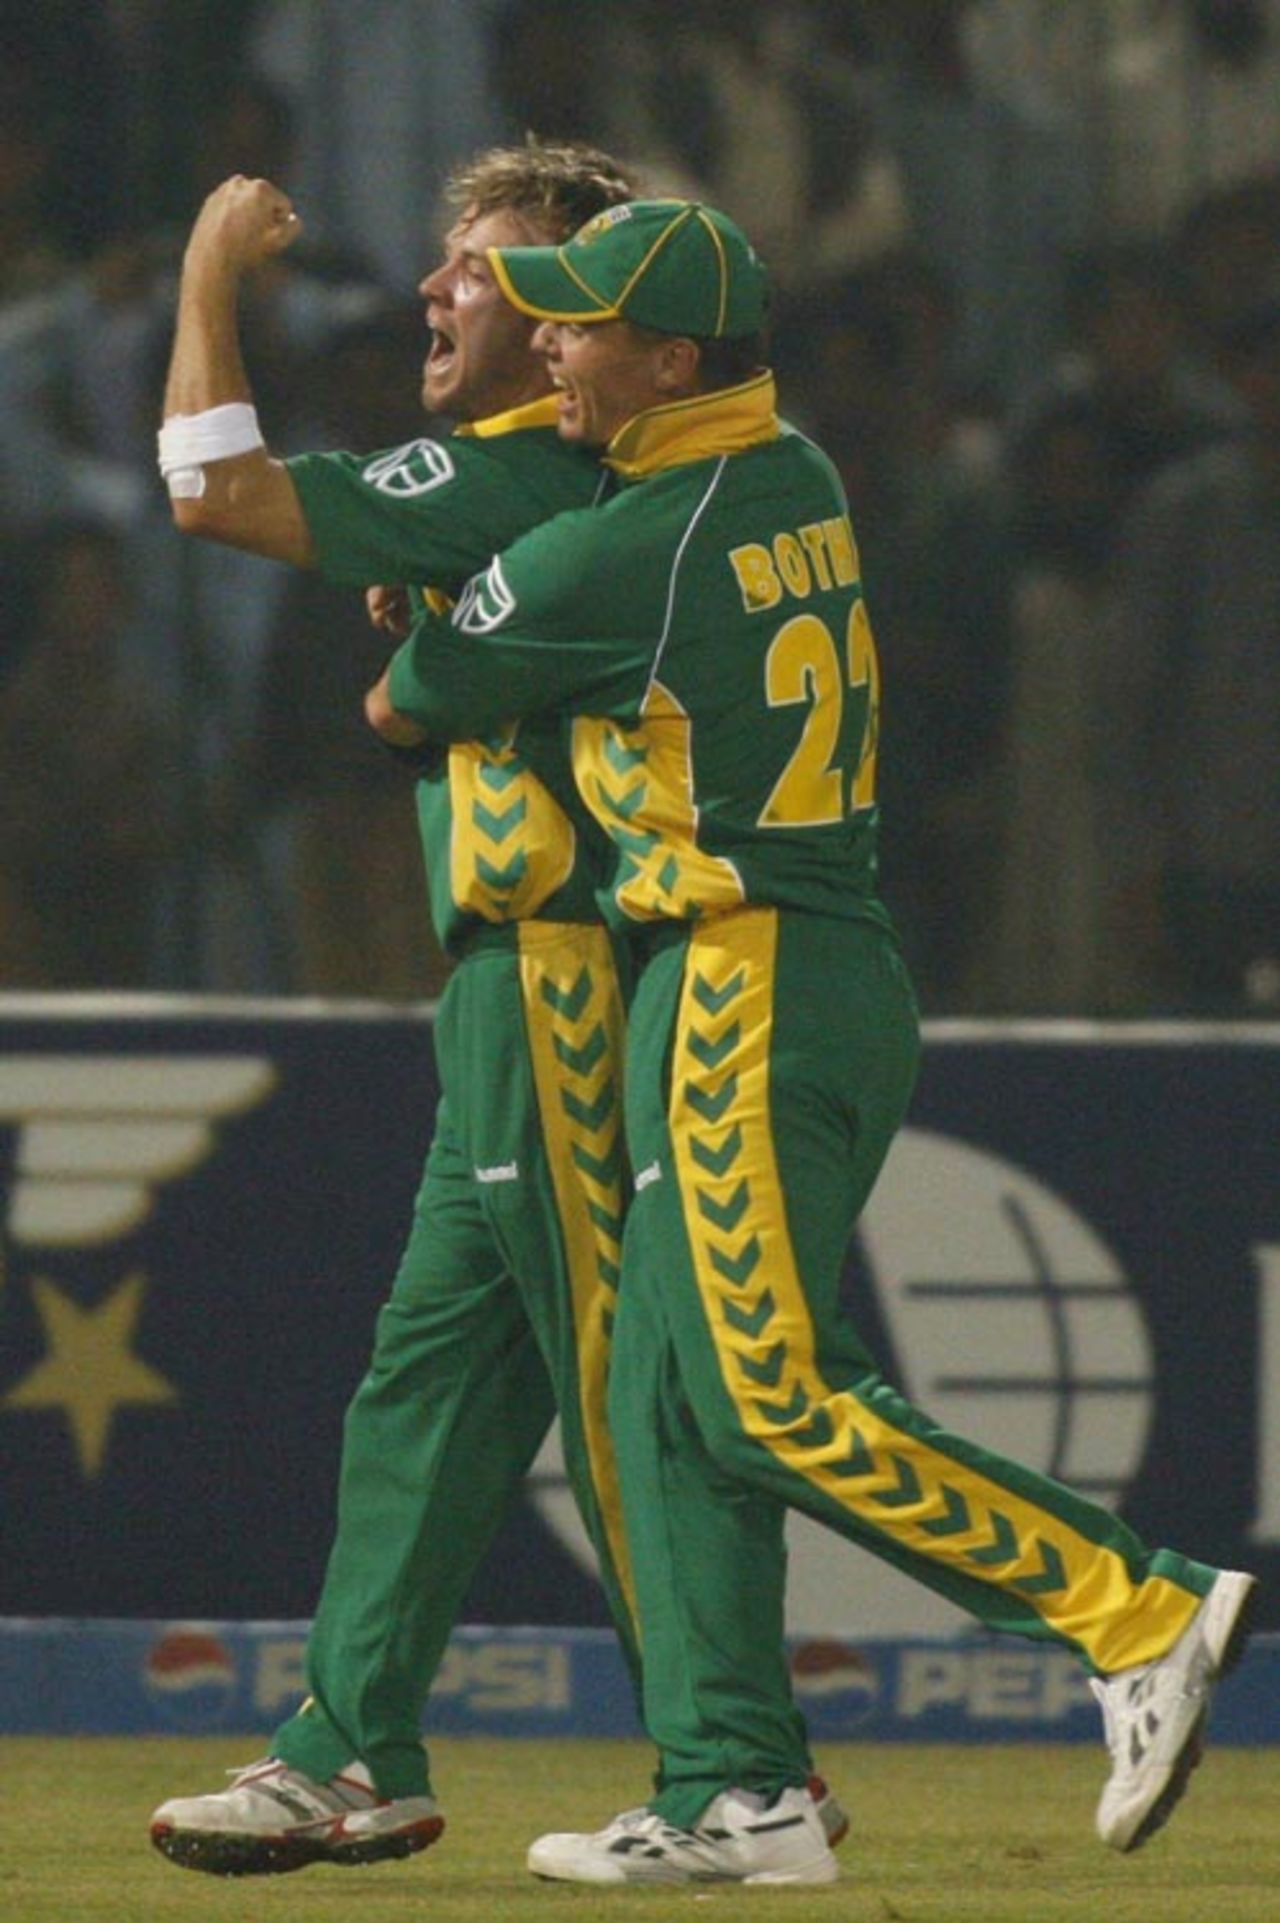 AB de Villiers is hugged by Johan Botha after he took an acrobatic catch, Pakistan v South Africa, 5th ODI, Lahore, October 29, 2007 